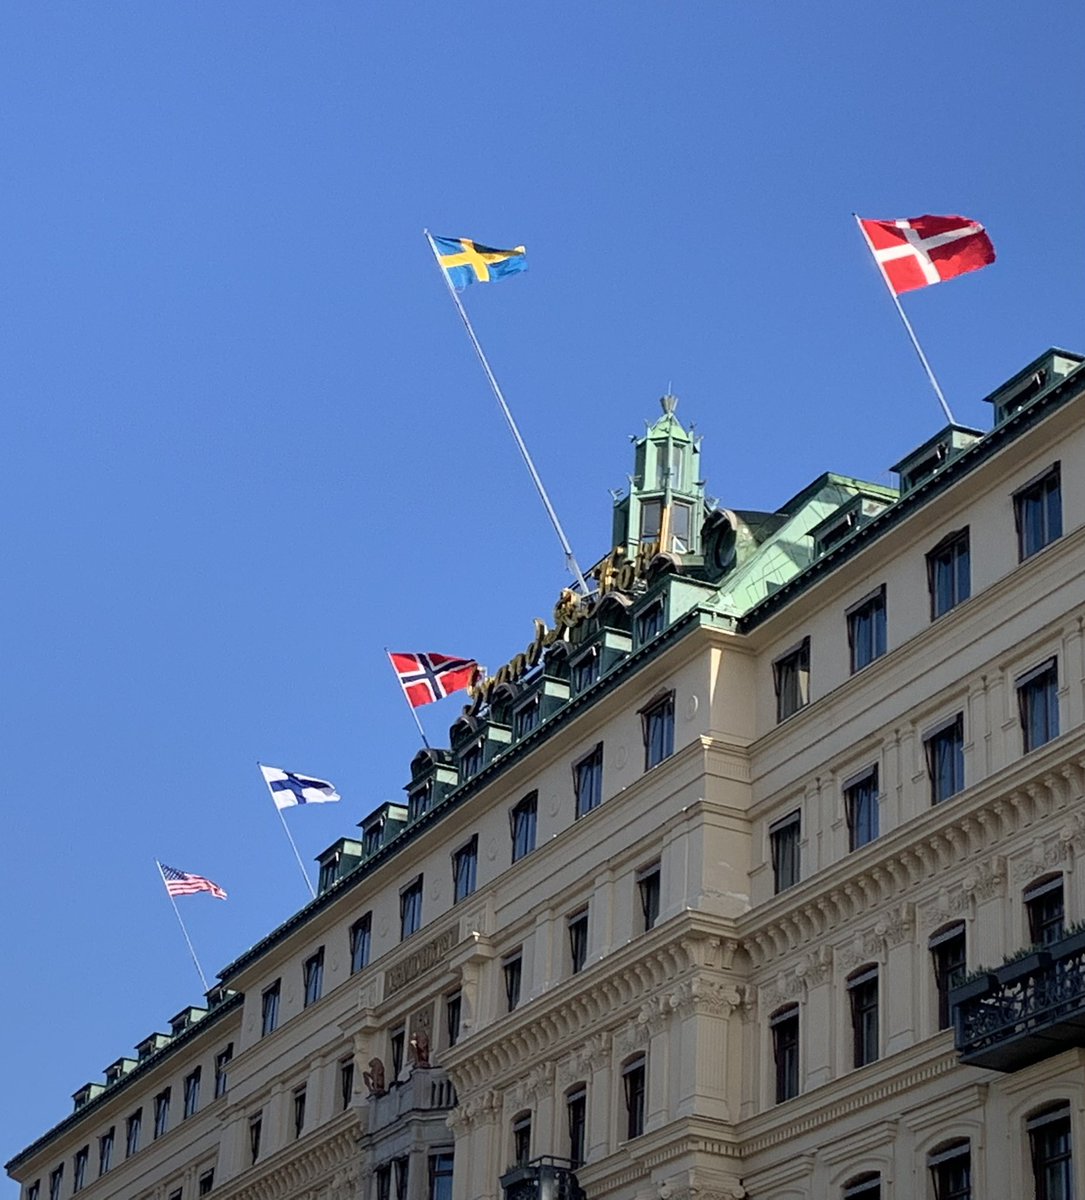 Happy #NordicDay ! On this March 23rd, we can celebrate the fact that all the Nordic countries will soon be part of the same alliance for the first time since the Kalmar Union (1397-1523) !